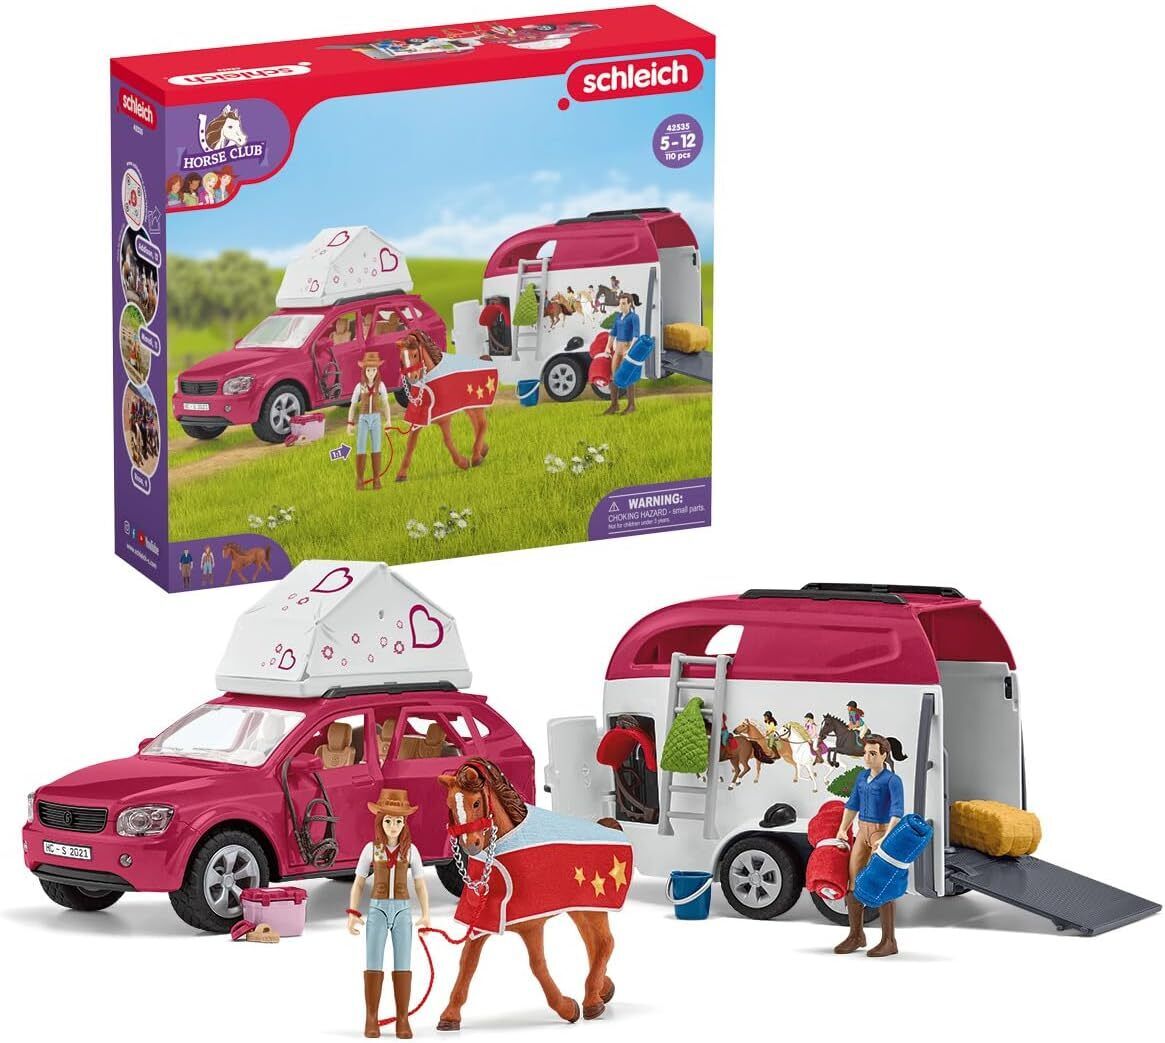 Car and Trailer Toys - Multi Piece SUV & Trailer Playset, with Ho